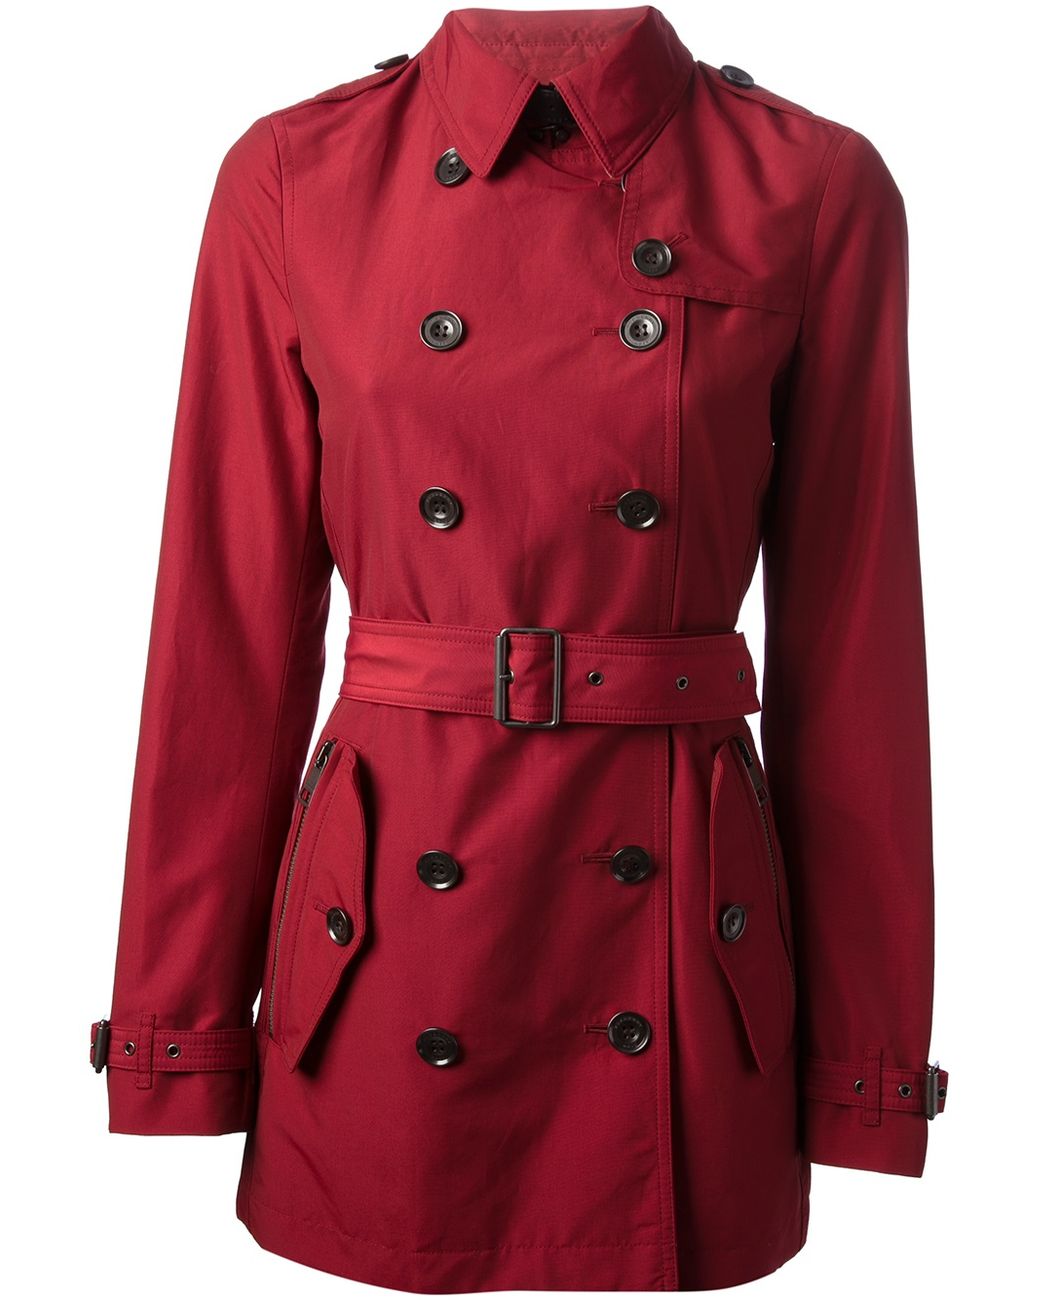 Burberry Brit Brookesby Trench Coat in Red | Lyst